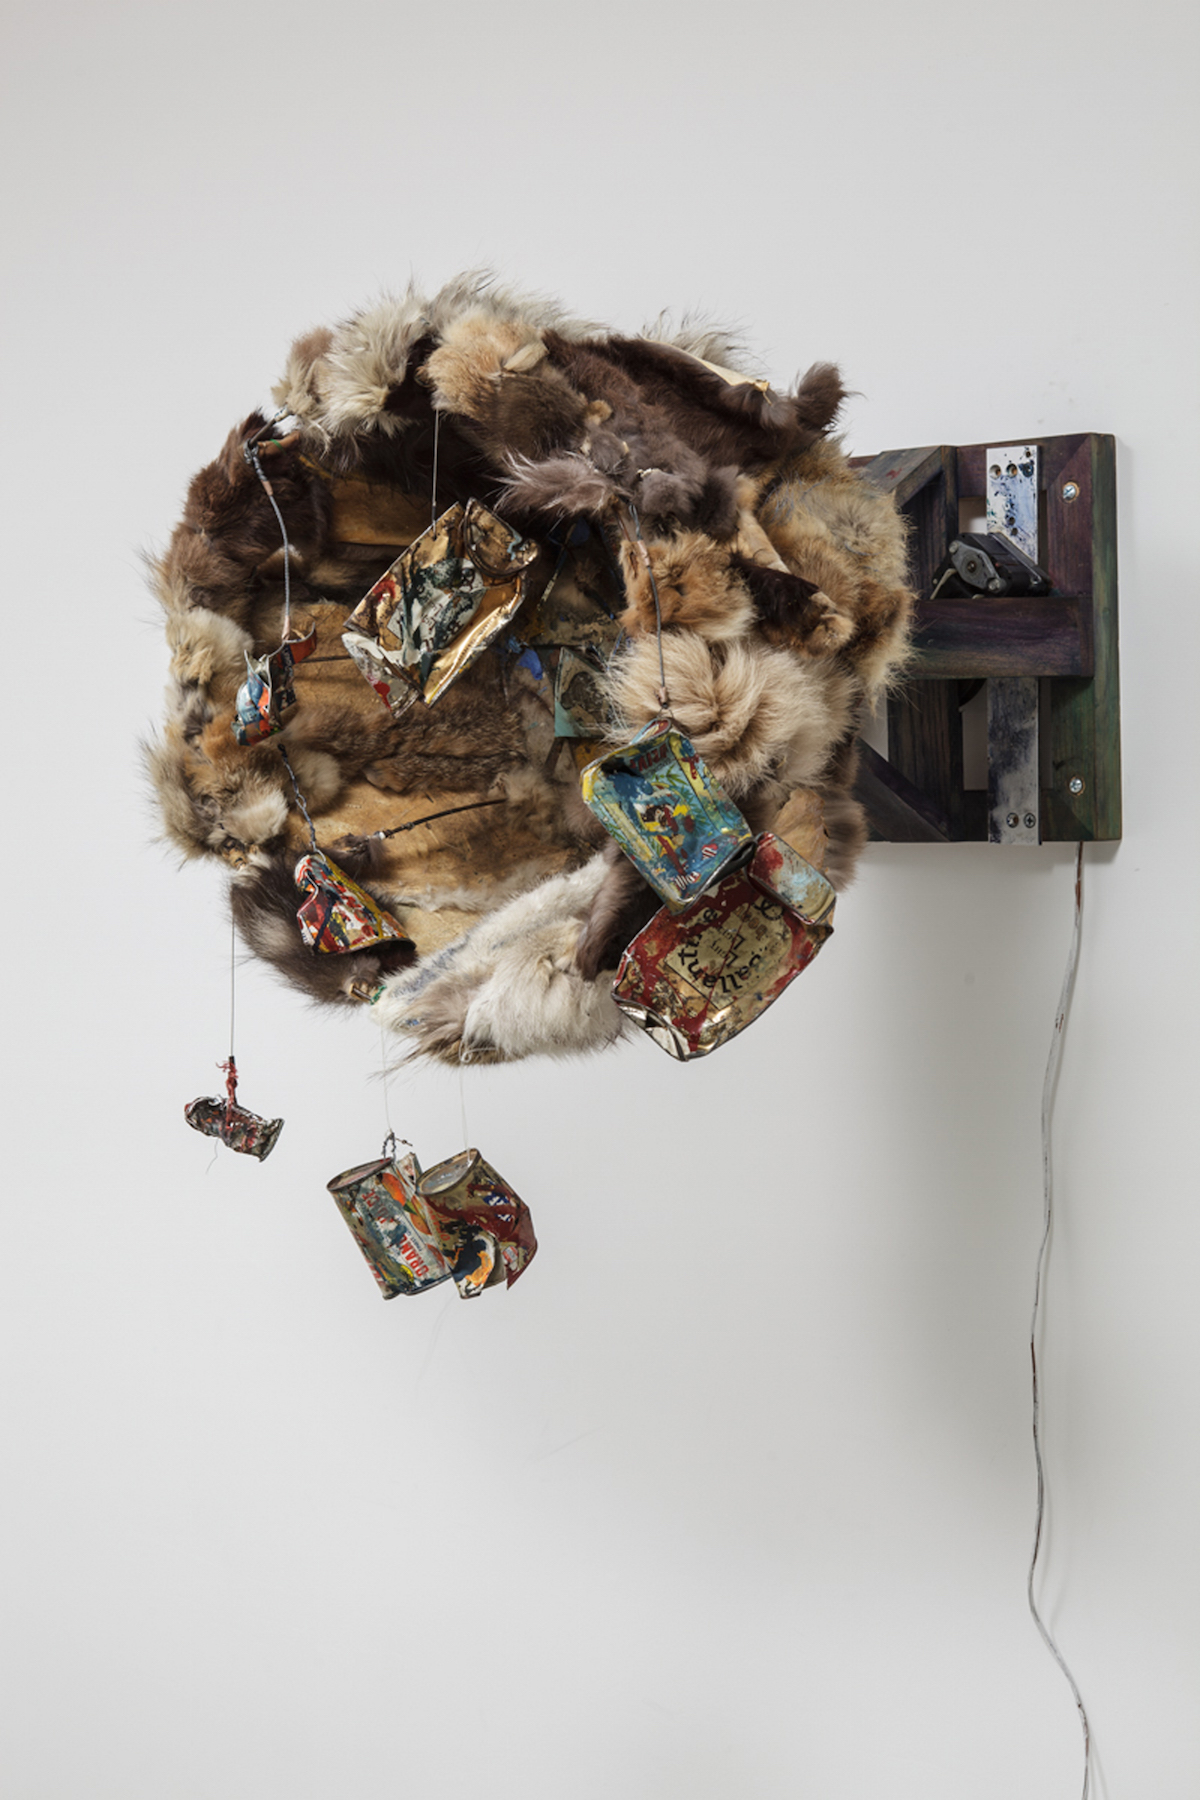 circular installation made of fur with cans, paint, and other multimedia/assemblage elements in the center or hanging from the structure